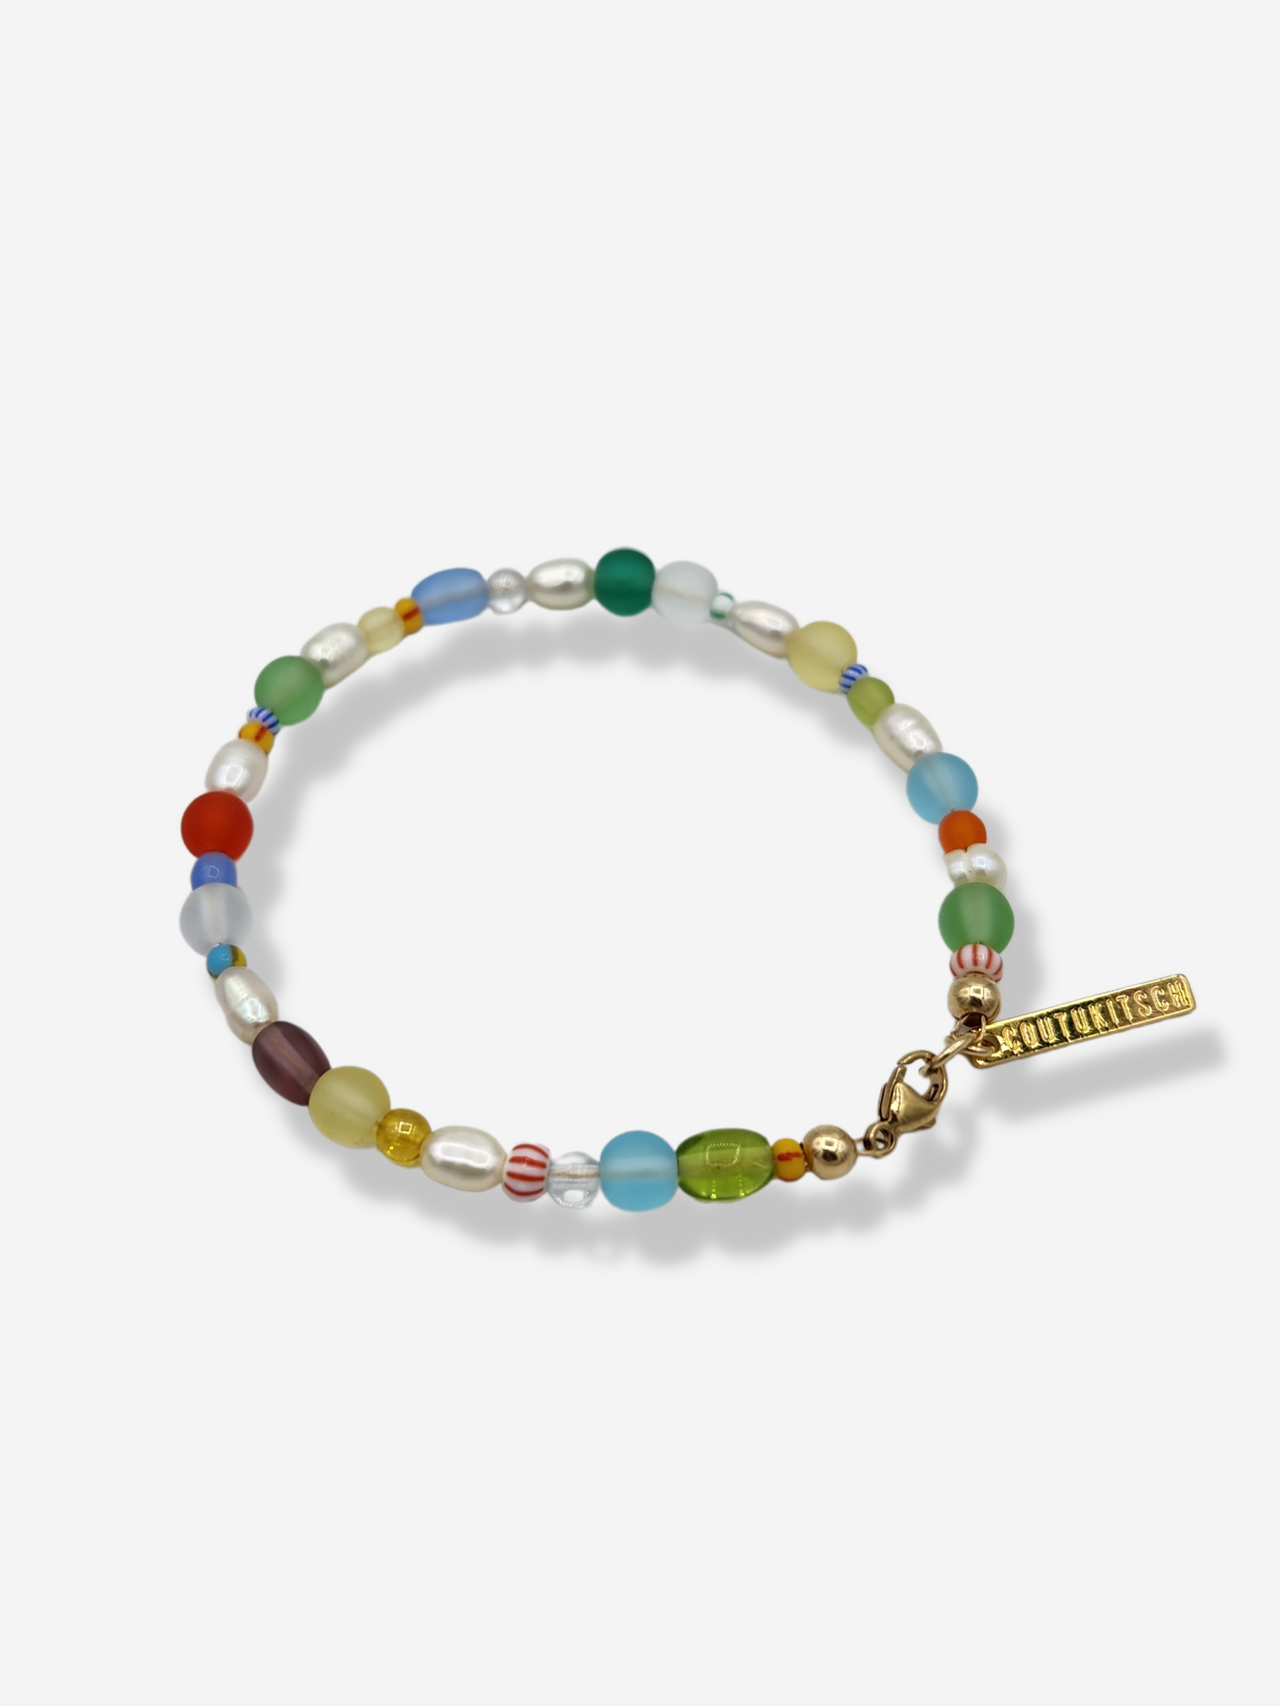 BRACELETS – COUTUKITSCH